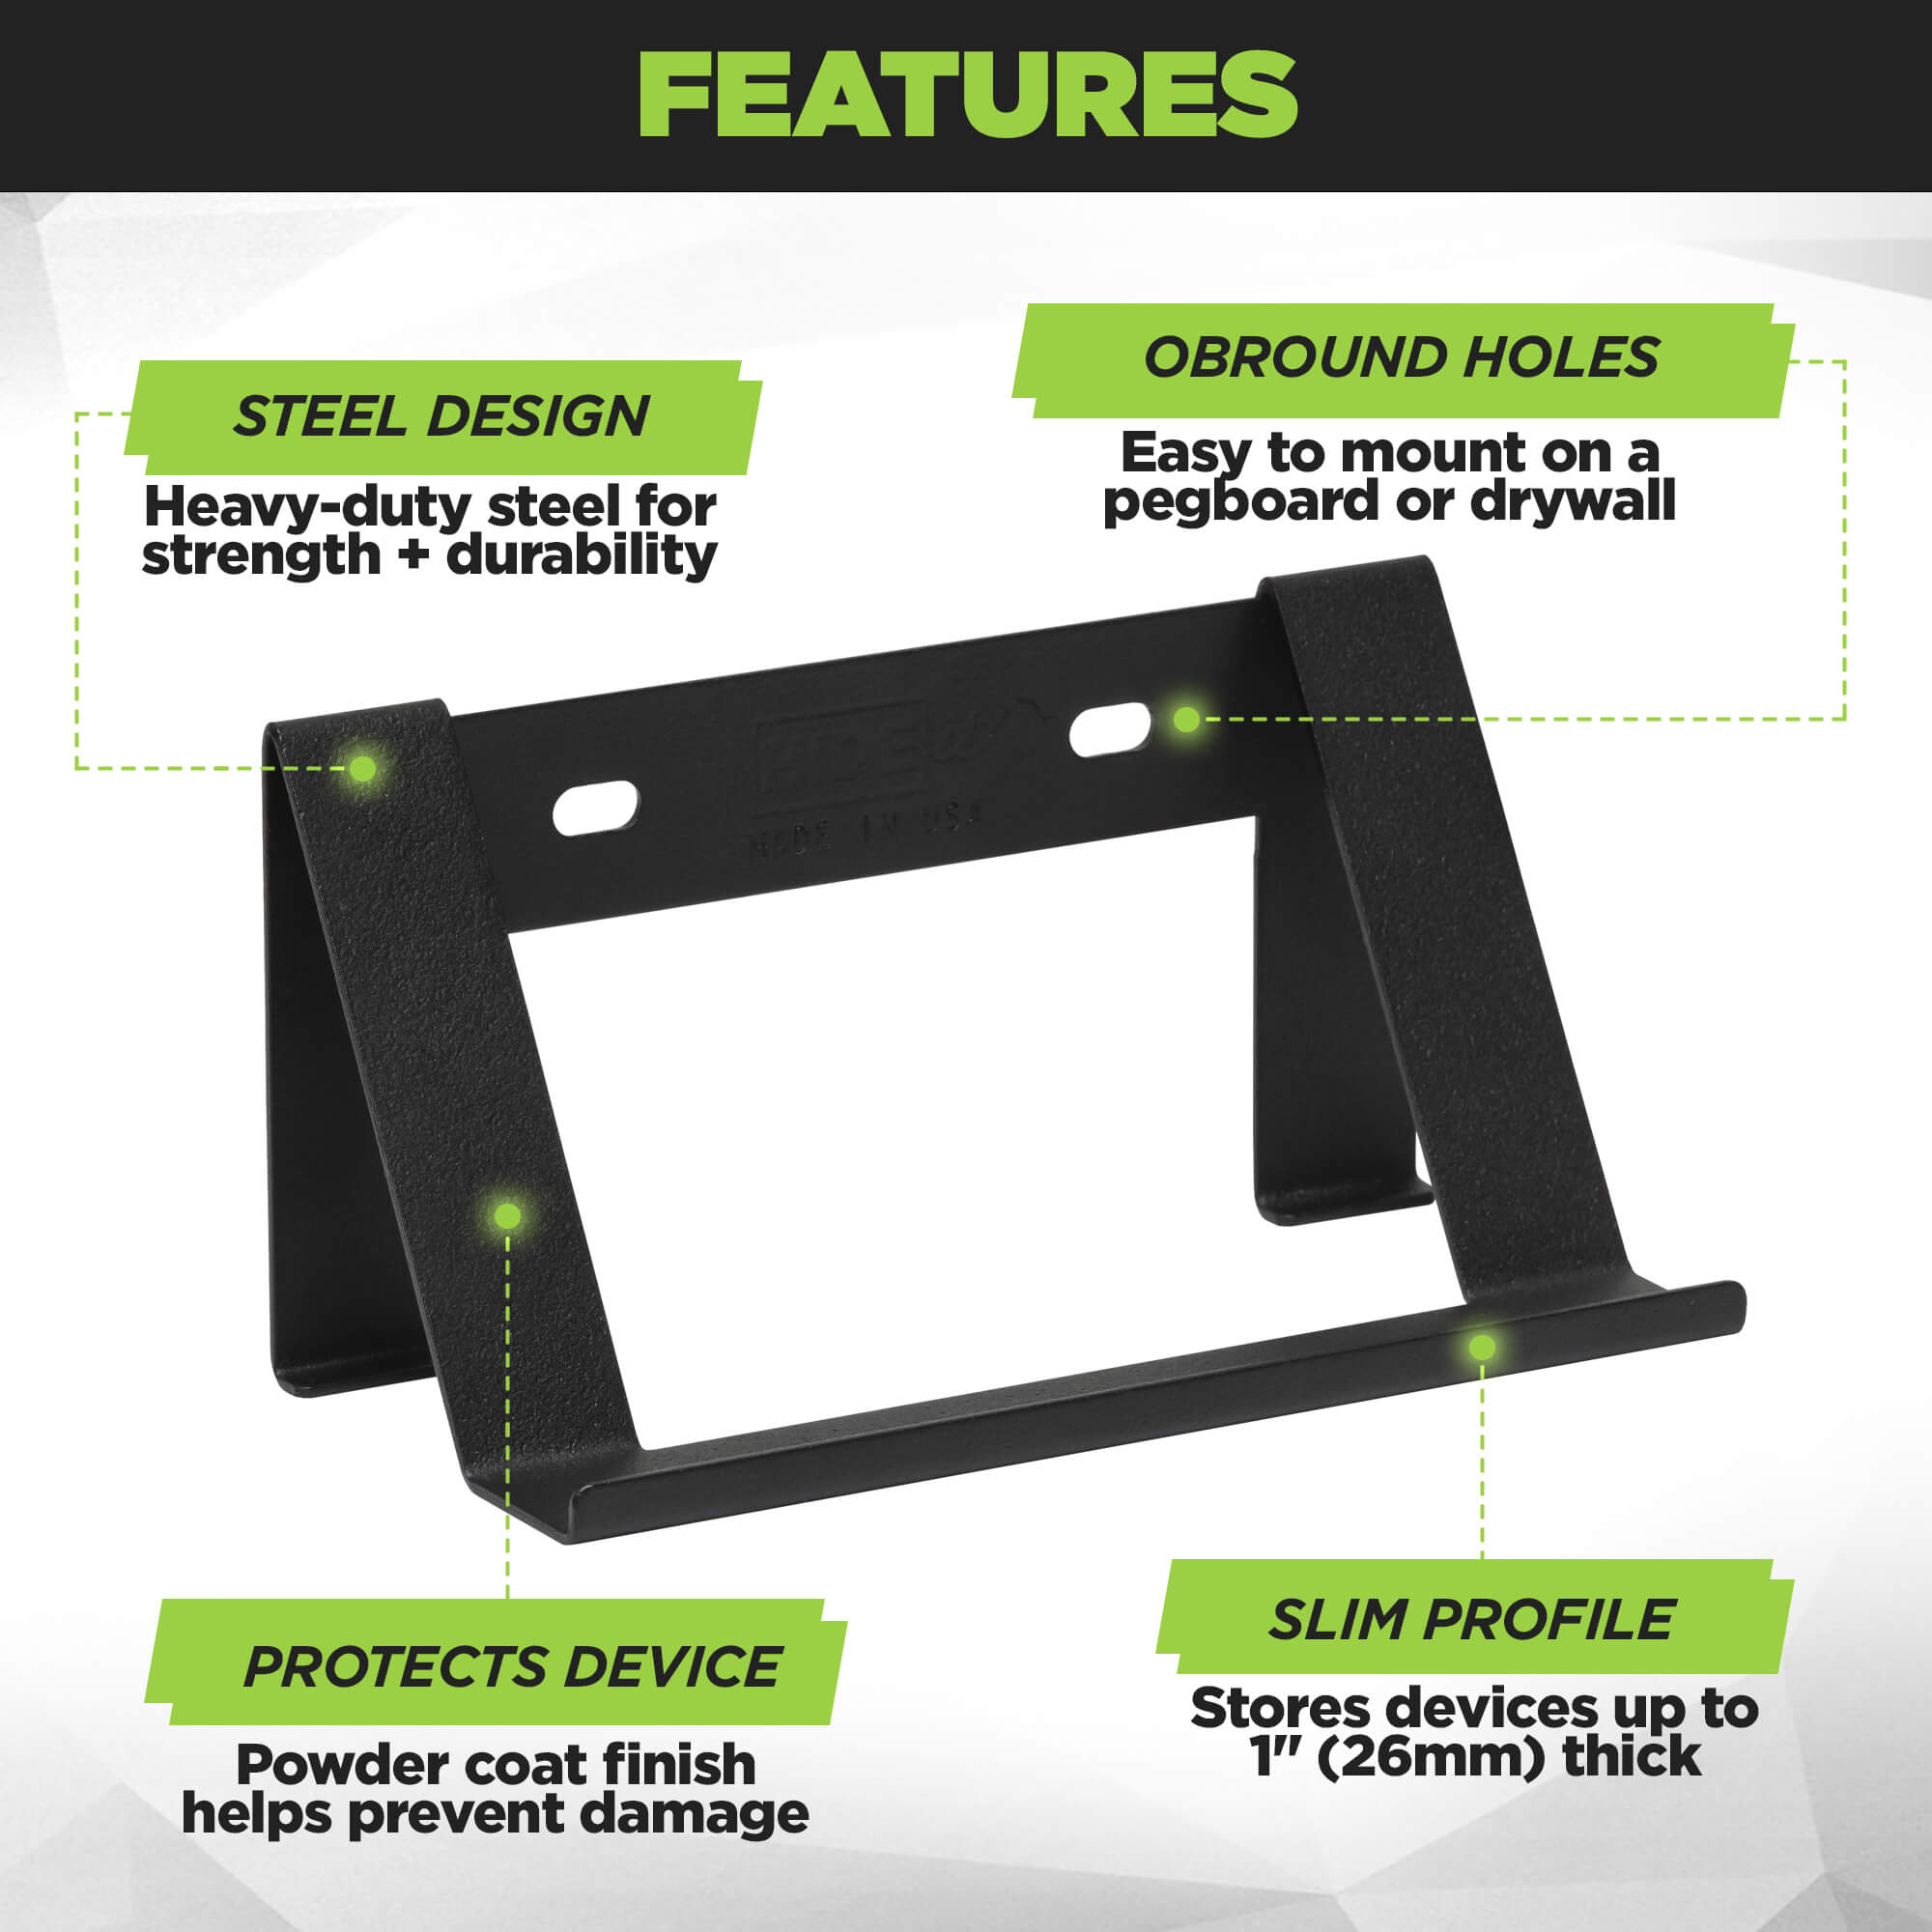 HIDEit Keyboard Mount is made from heavy-duty steel fro strength and durability.